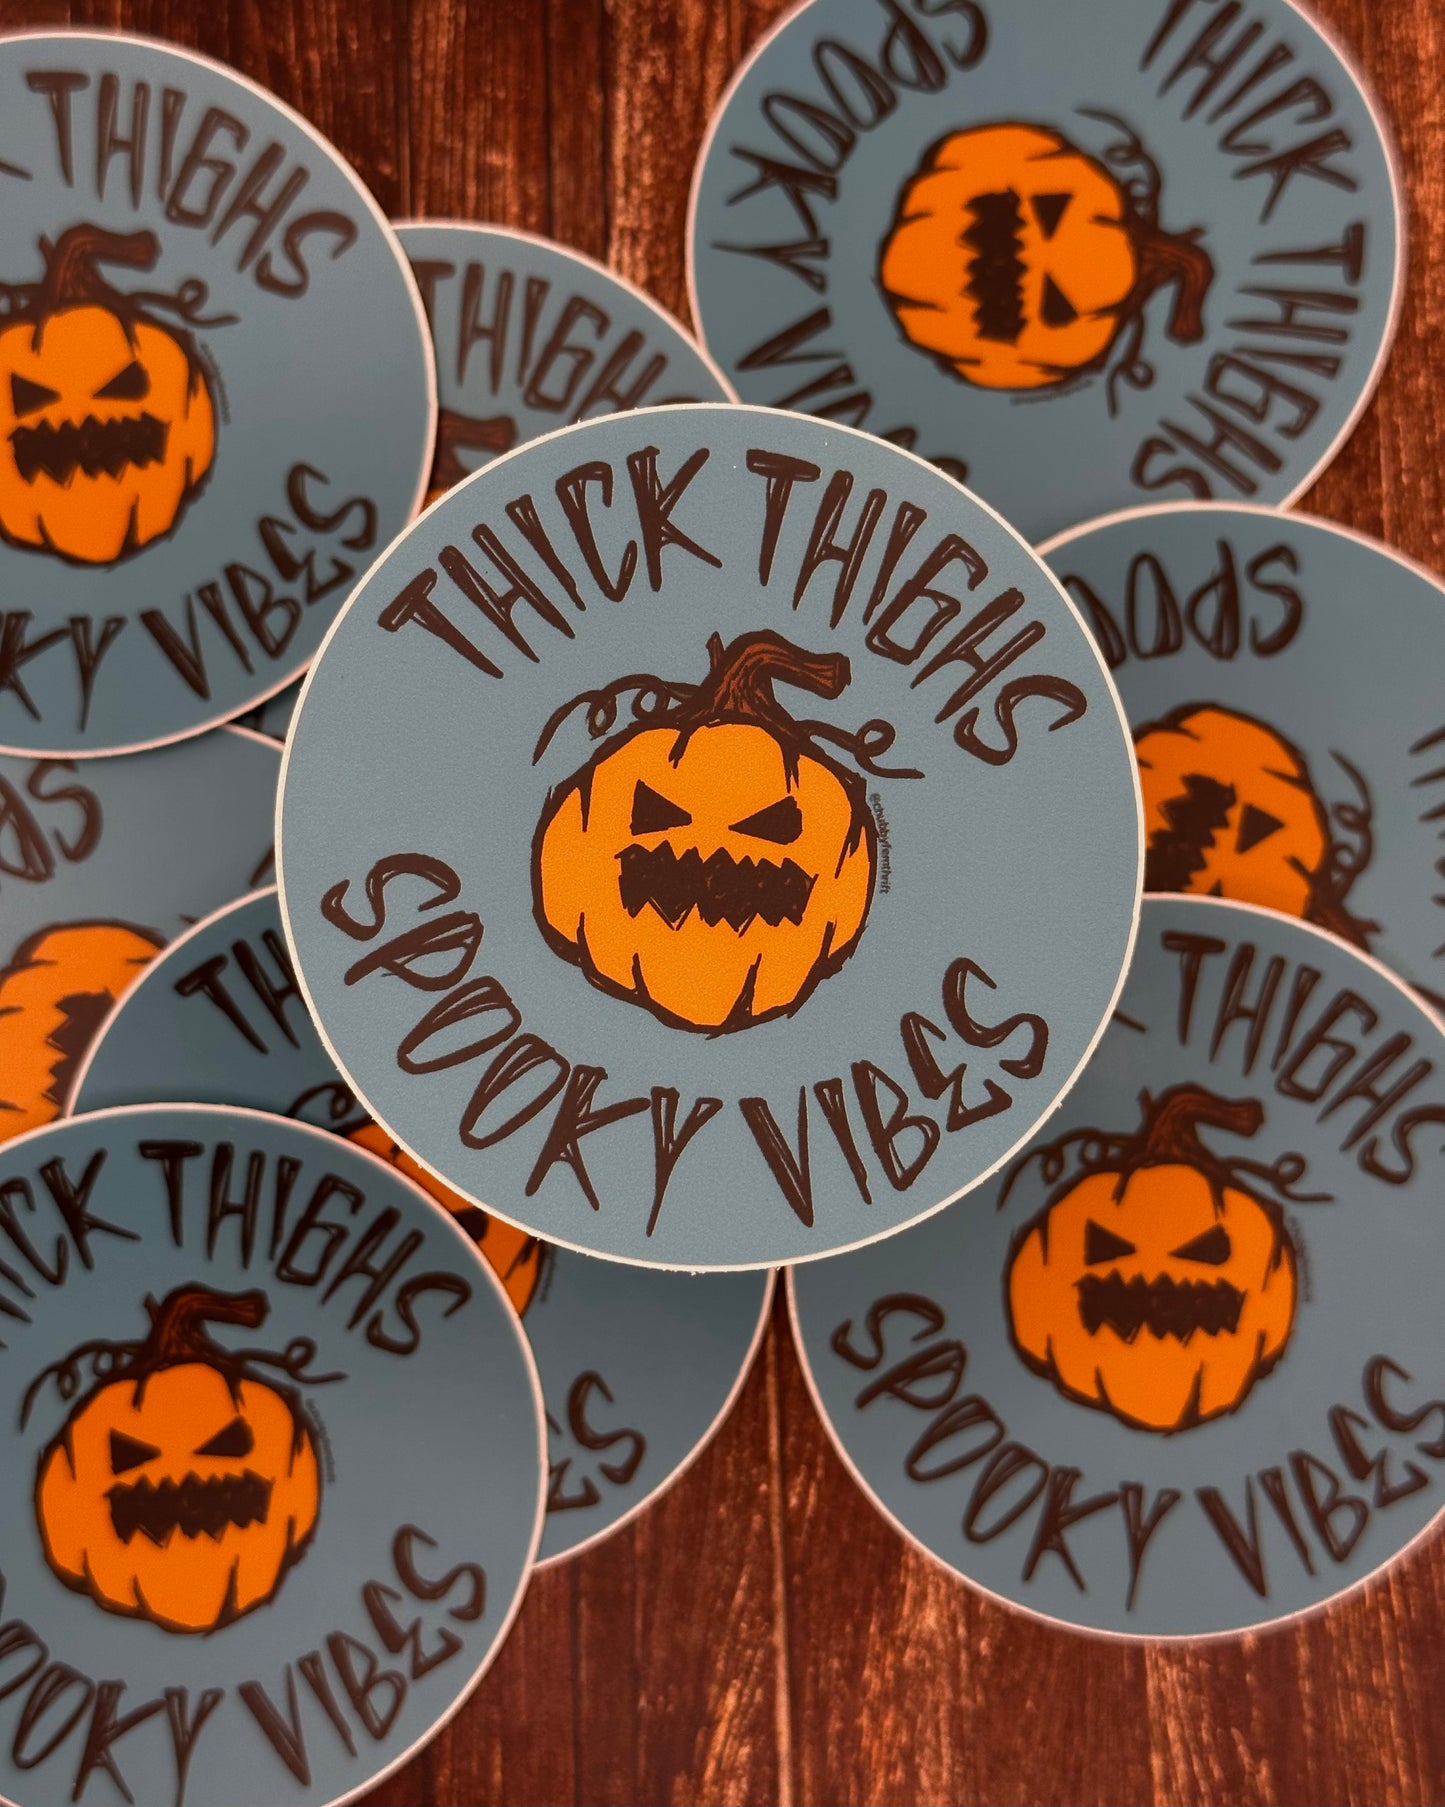 “Thick Thighs Spooky Vibes” Halloween Sticker